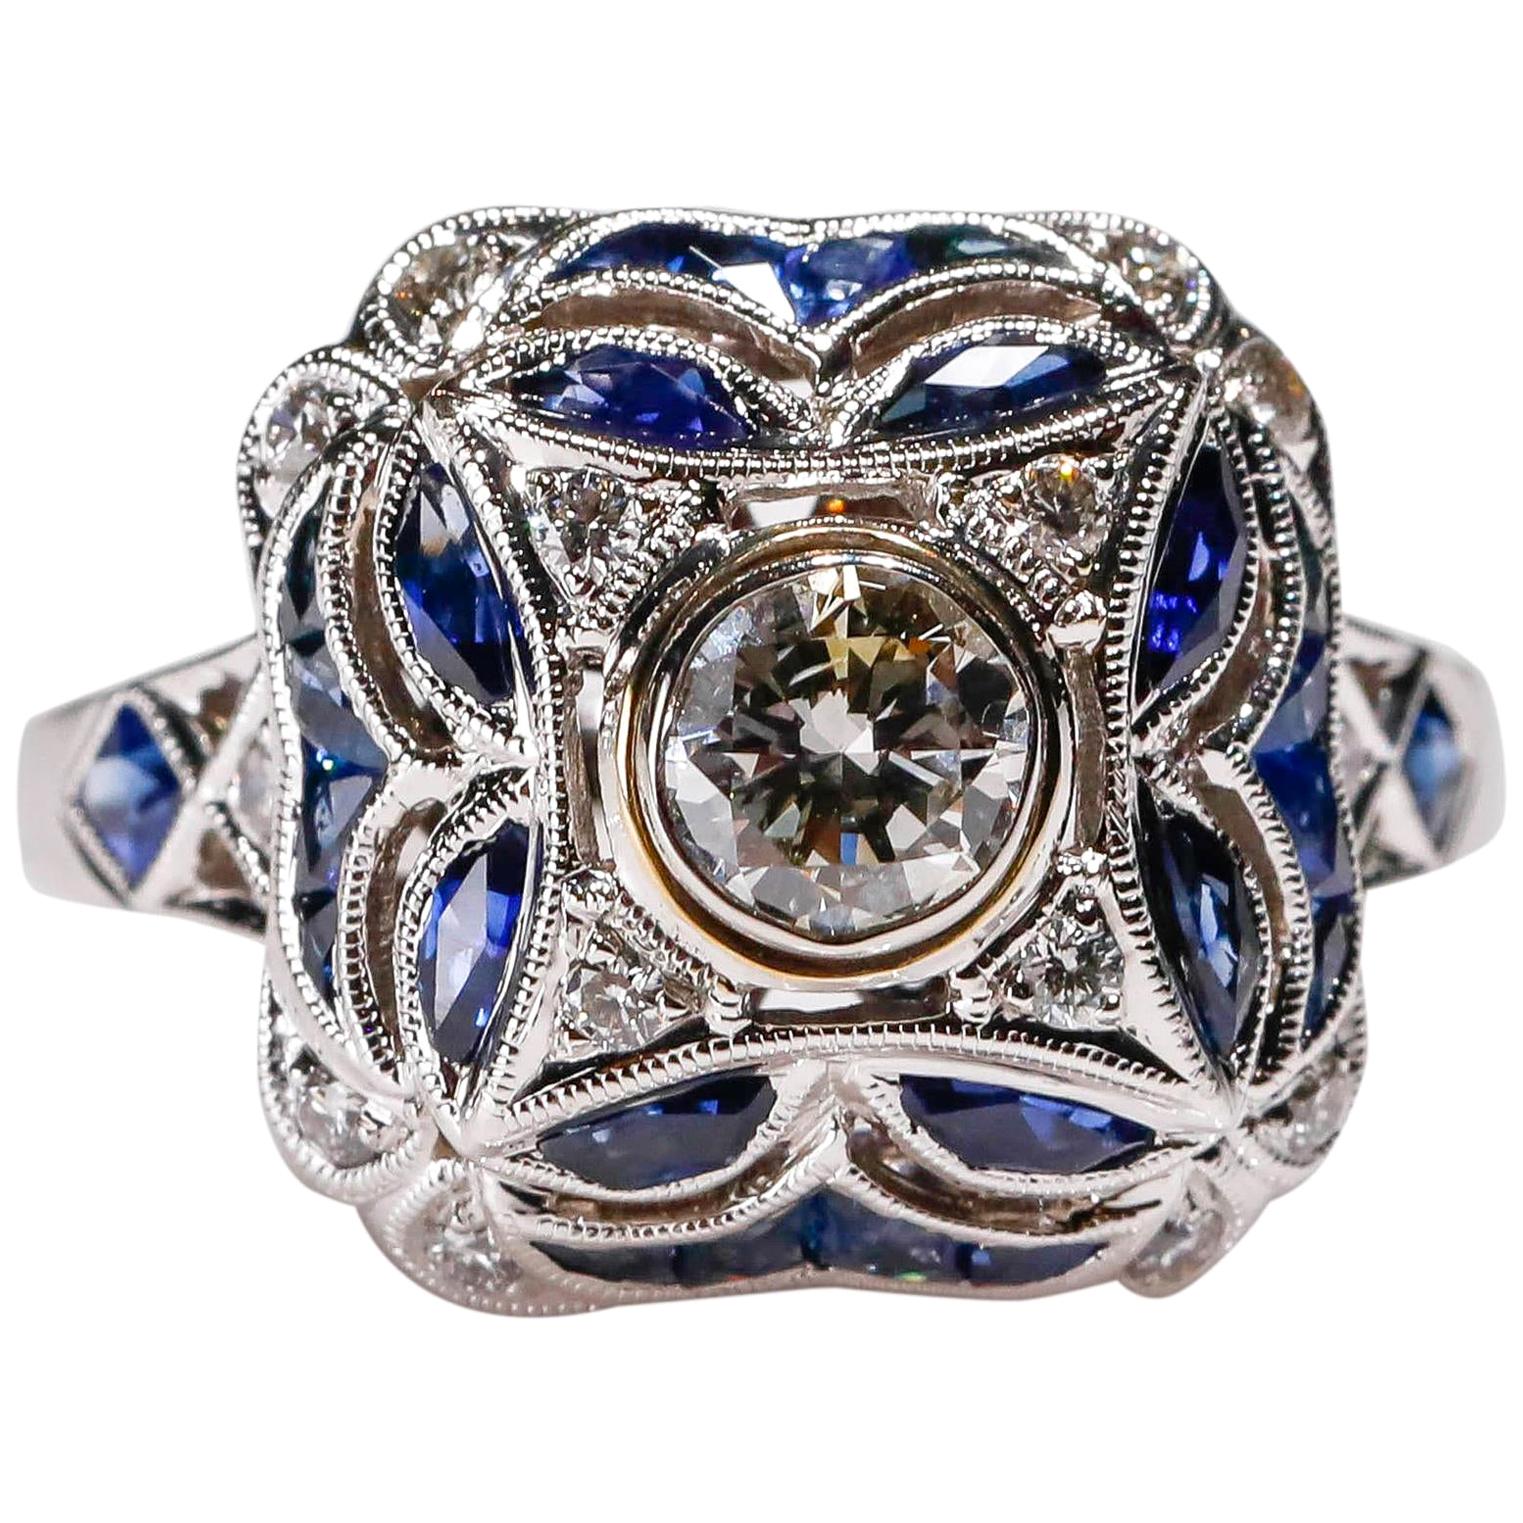 0.5 Carat Sapphire 0.7 Carat Diamond 18K White Gold Engagement Ring New Art Deco Style

Crafted in 18kt White Gold, this Unique design showcases a Blue Sapphire 0.5 TCW, set in a halo of round-cut mesmerizing diamonds, Polished to a brilliant